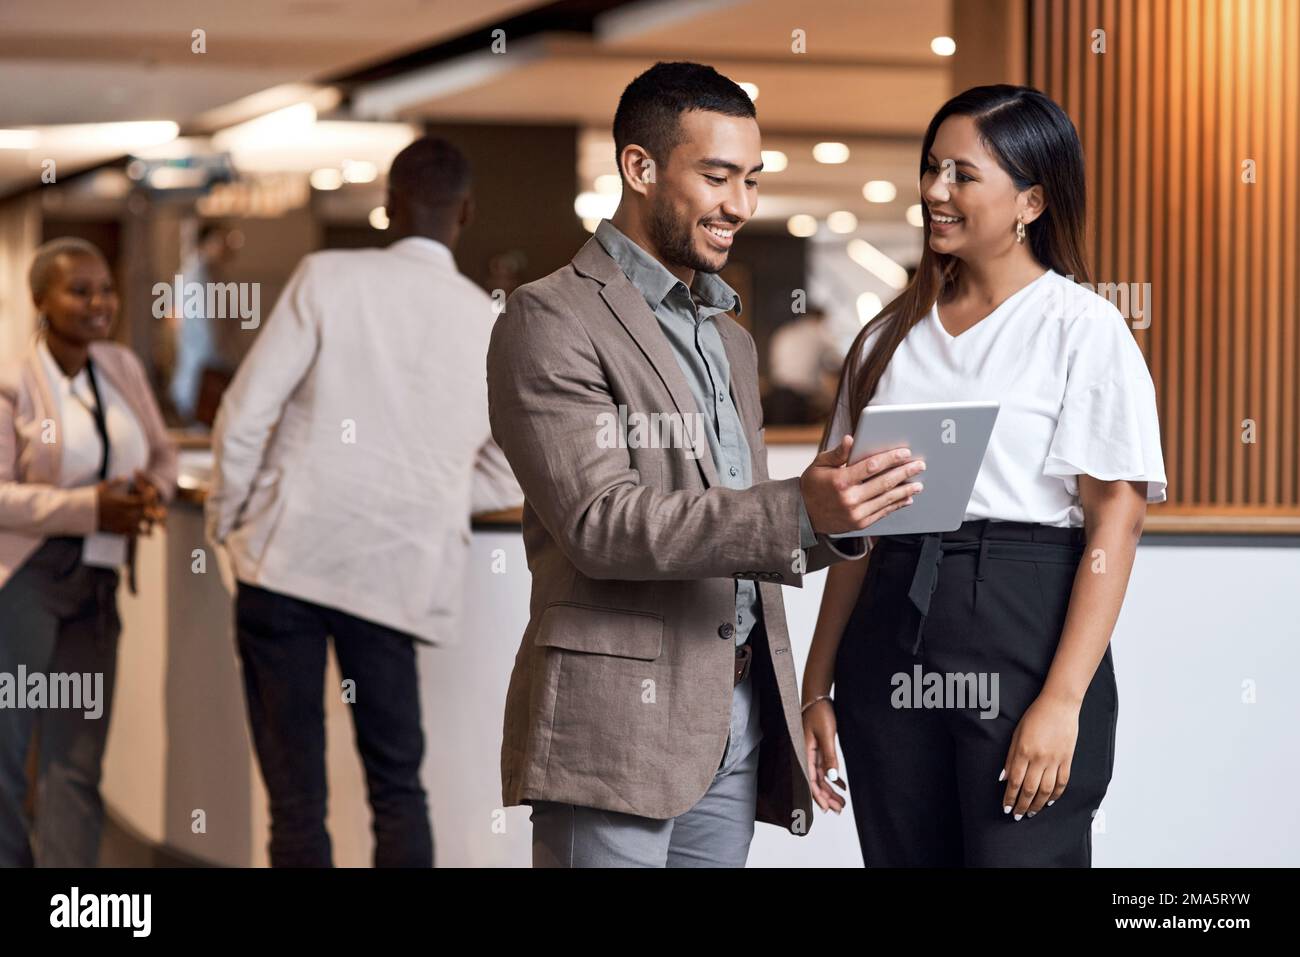 Meet with influential people and make your presence known. a young businessman and businesswoman using a digital tablet at a conference. Stock Photo